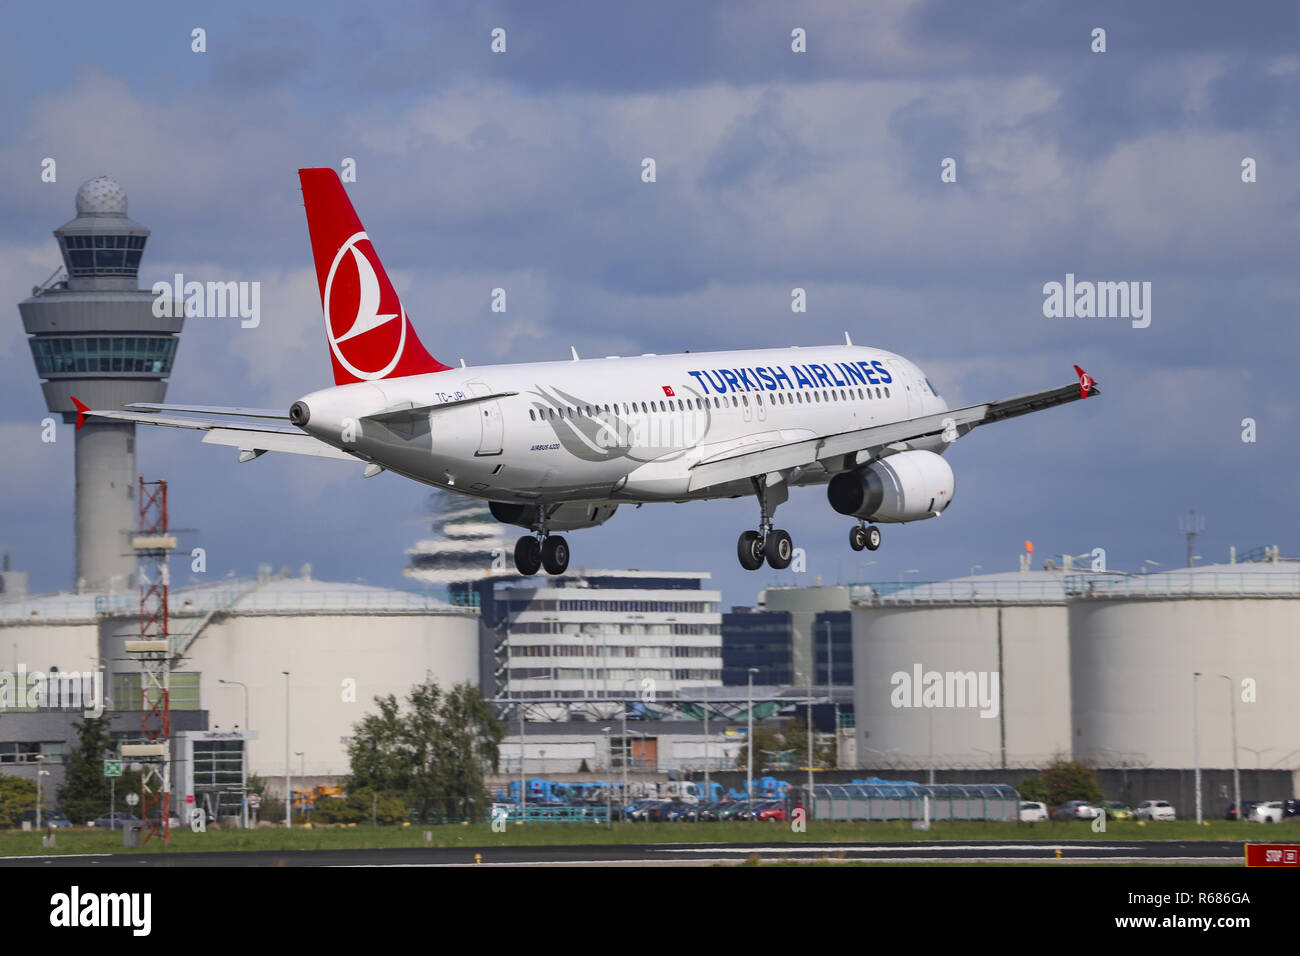 Netherlands. 30th Aug, 2018. Turkish Airlines Airbus A320-200 seen landing at the Amsterdam Schiphol International Airport in the Netherlands on a sunny day. The aircraft is an Airbus A320-232, equipped with two V2500 engines, with registration TC-JPL and airplane name Goreme. Turkish Airlines TK connects Amsterdam AMS/EHAM to Istanbul AtatÃ¼rk IST/LTBA airport and Istanbul Sabiha GÃ¶kçen SAW/LTFJ in Turkey. Credit: Nicolas Economou/SOPA Images/ZUMA Wire/Alamy Live News Stock Photo